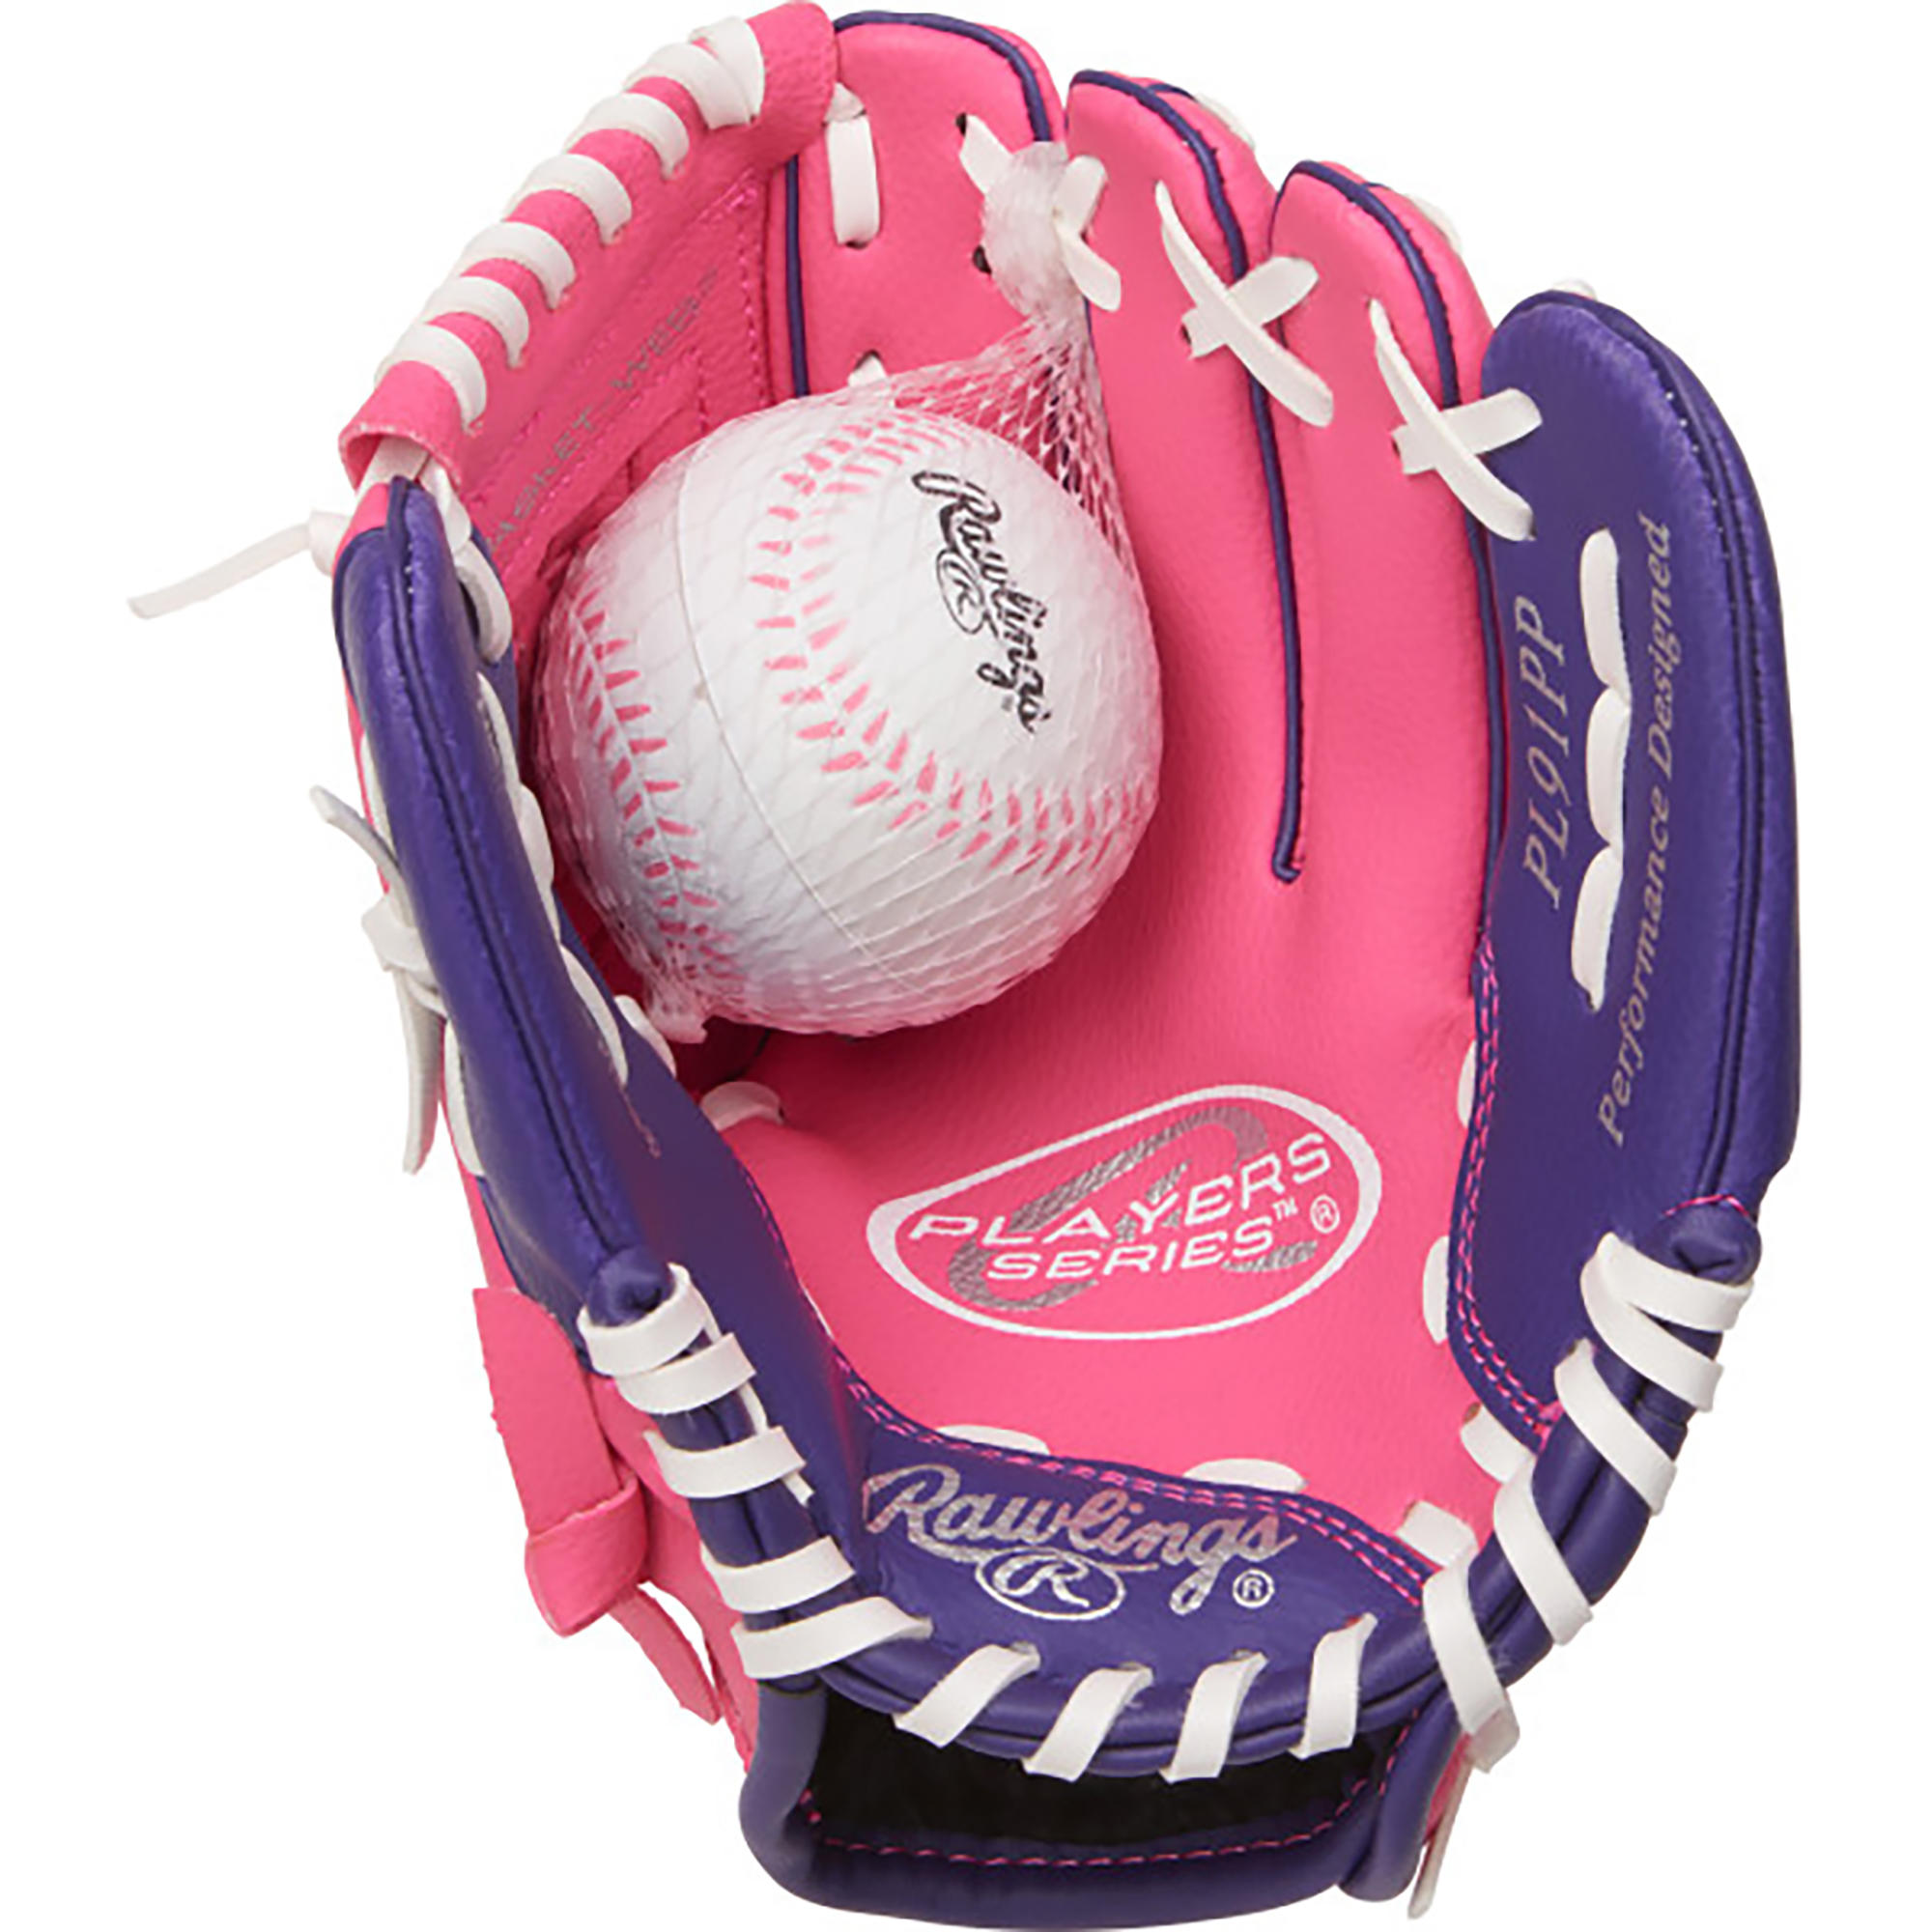 9" Right-Hand Glove with Ball - Player's Series - RAWLINGS